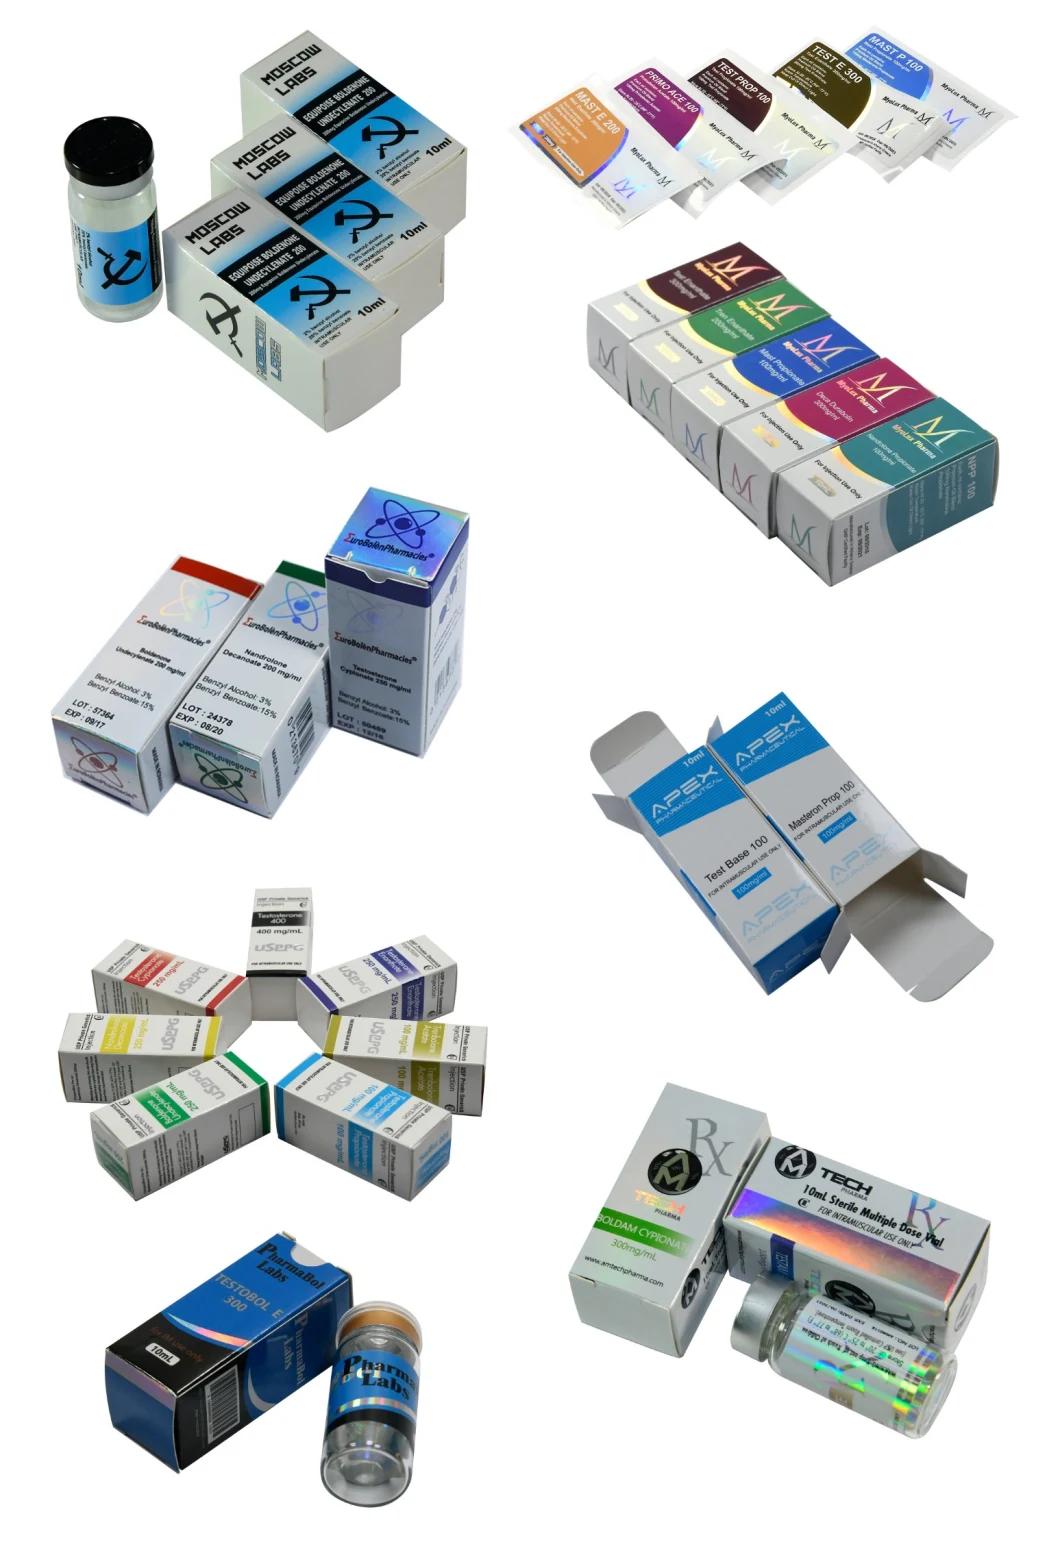 Custom 10ml Vial Ampoule Injection Pharma Label Printing Steroid Handsfree Cardboard Foldable Paper Box